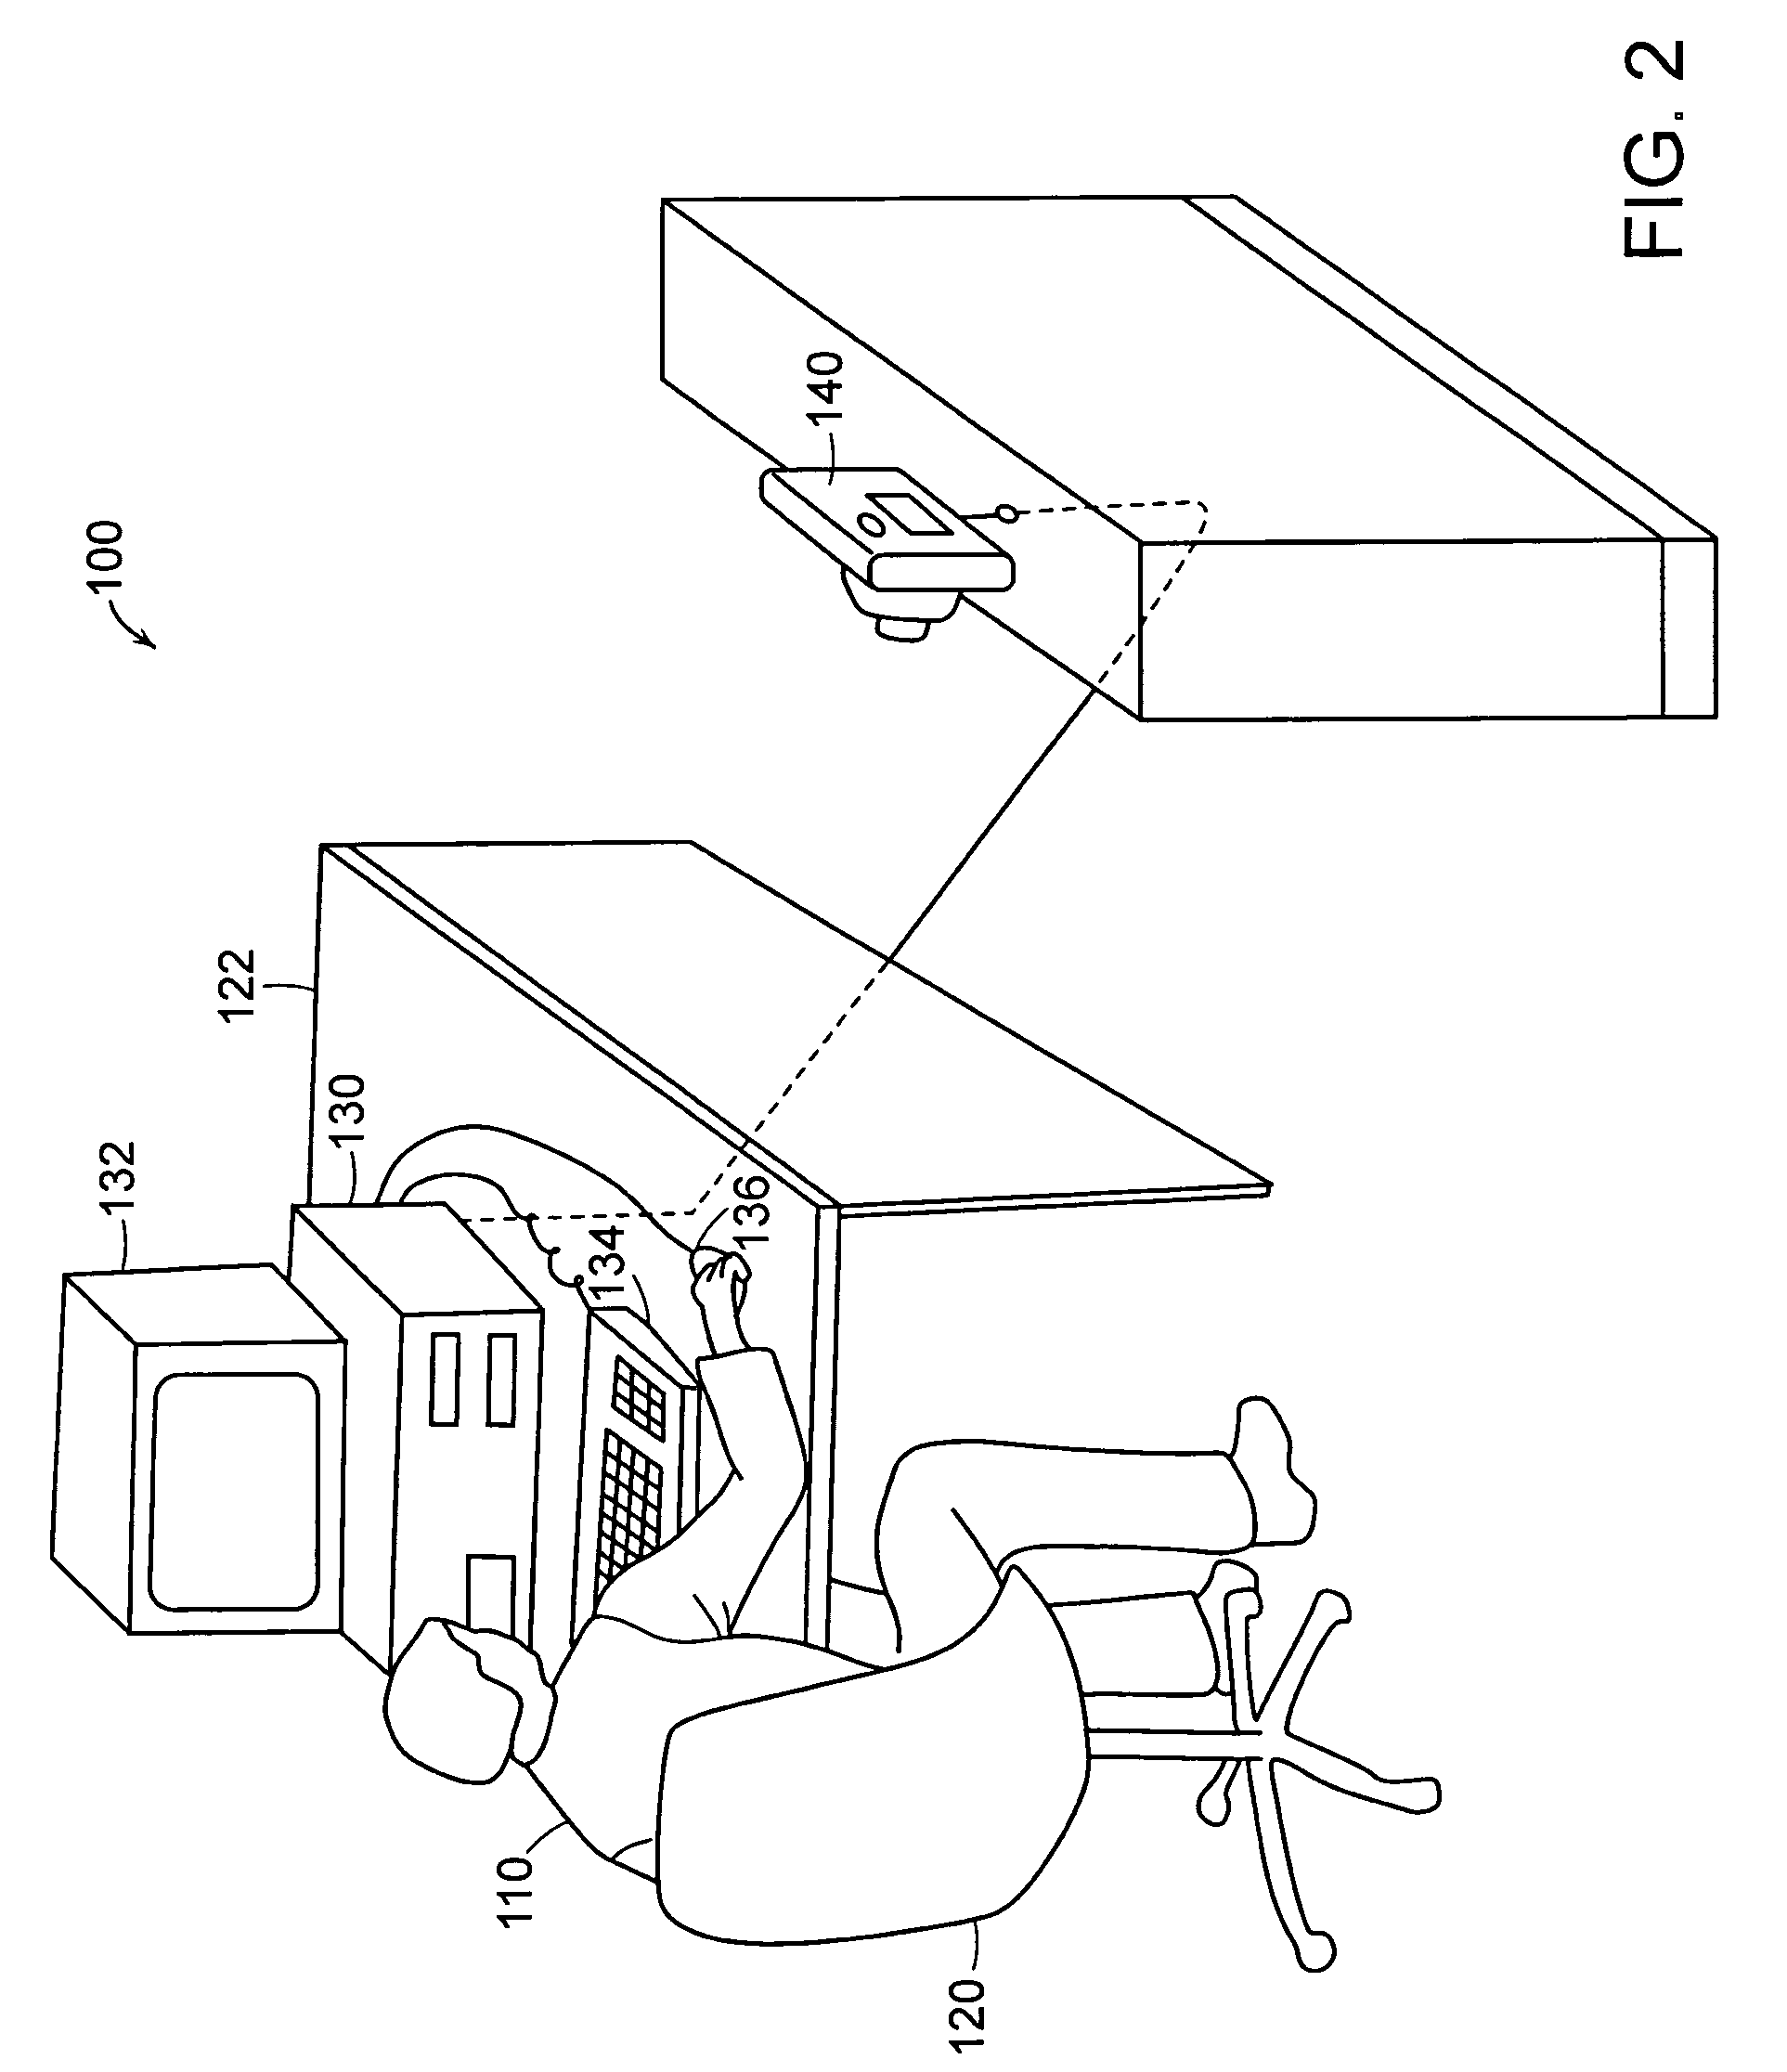 System and method for ergonomic tracking for individual physical exertion